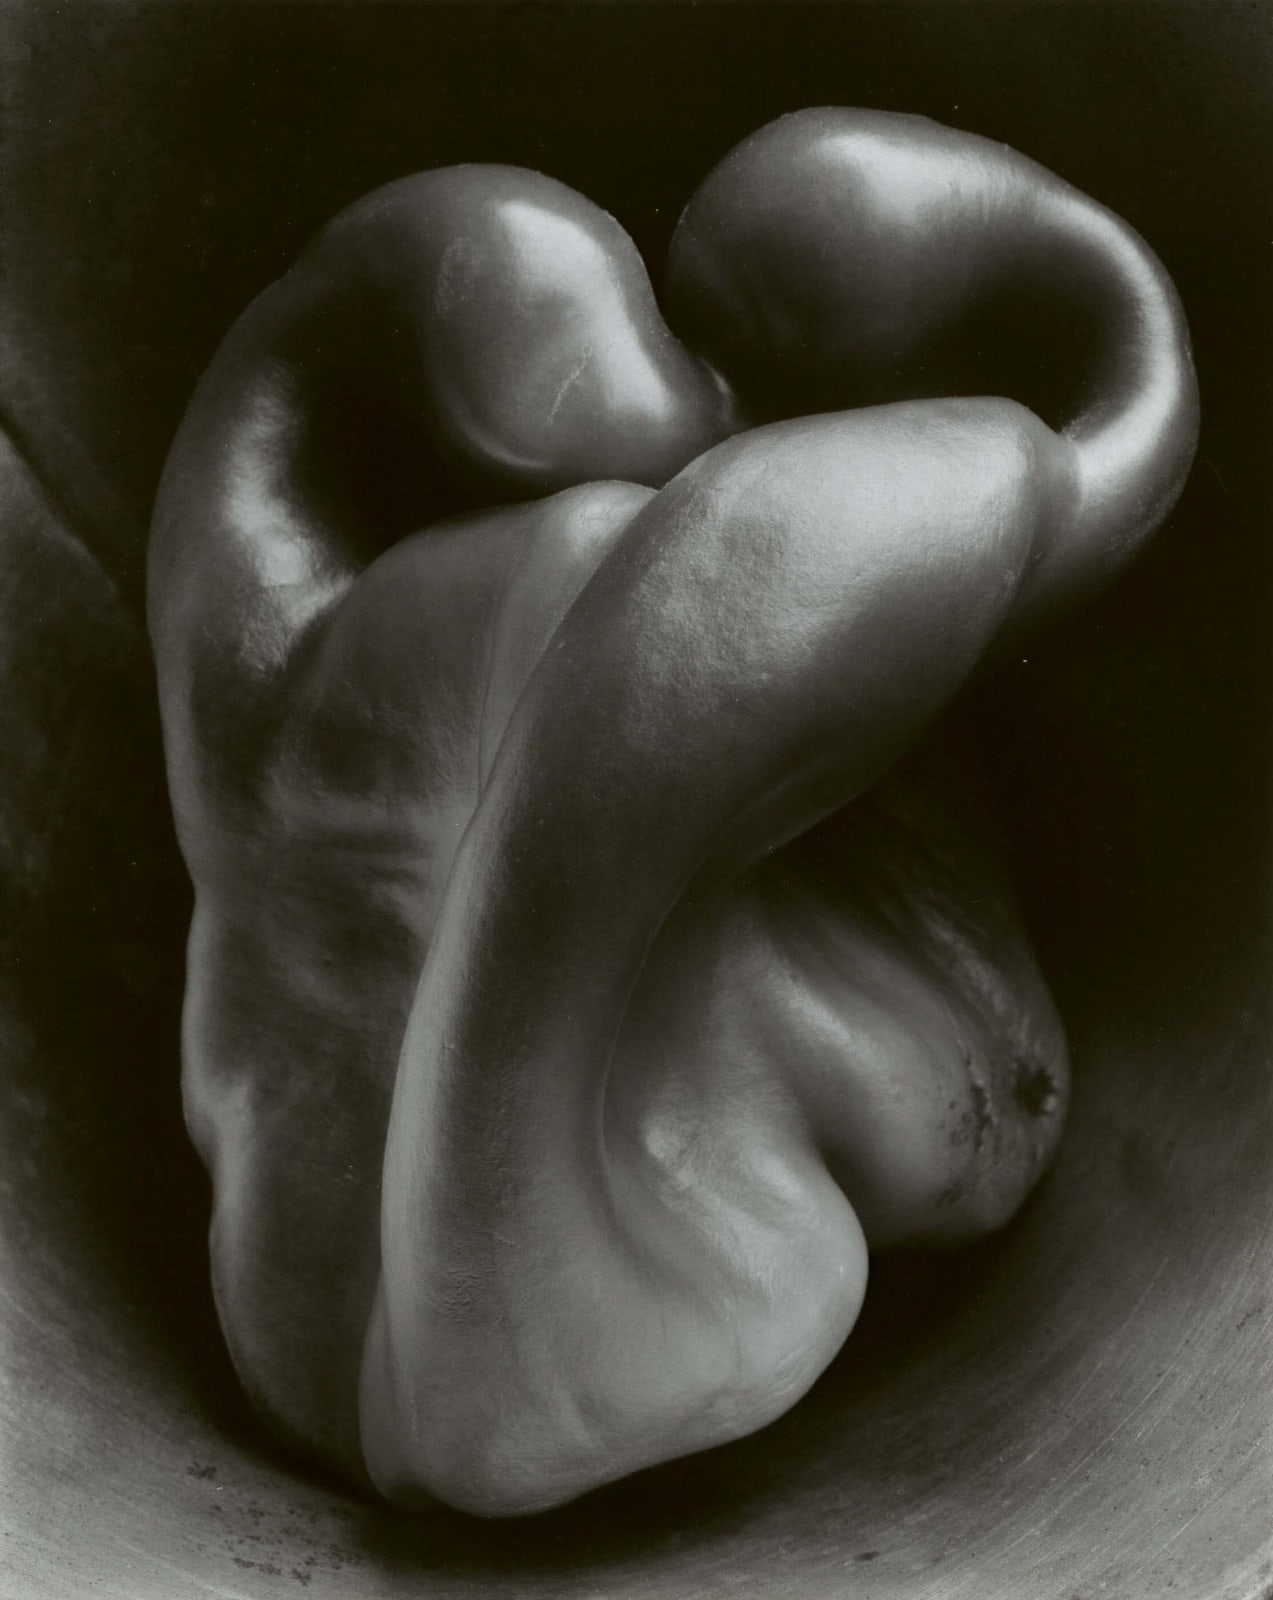 Edward Weston Pepper No 30 still life study of bell pepper in black and white